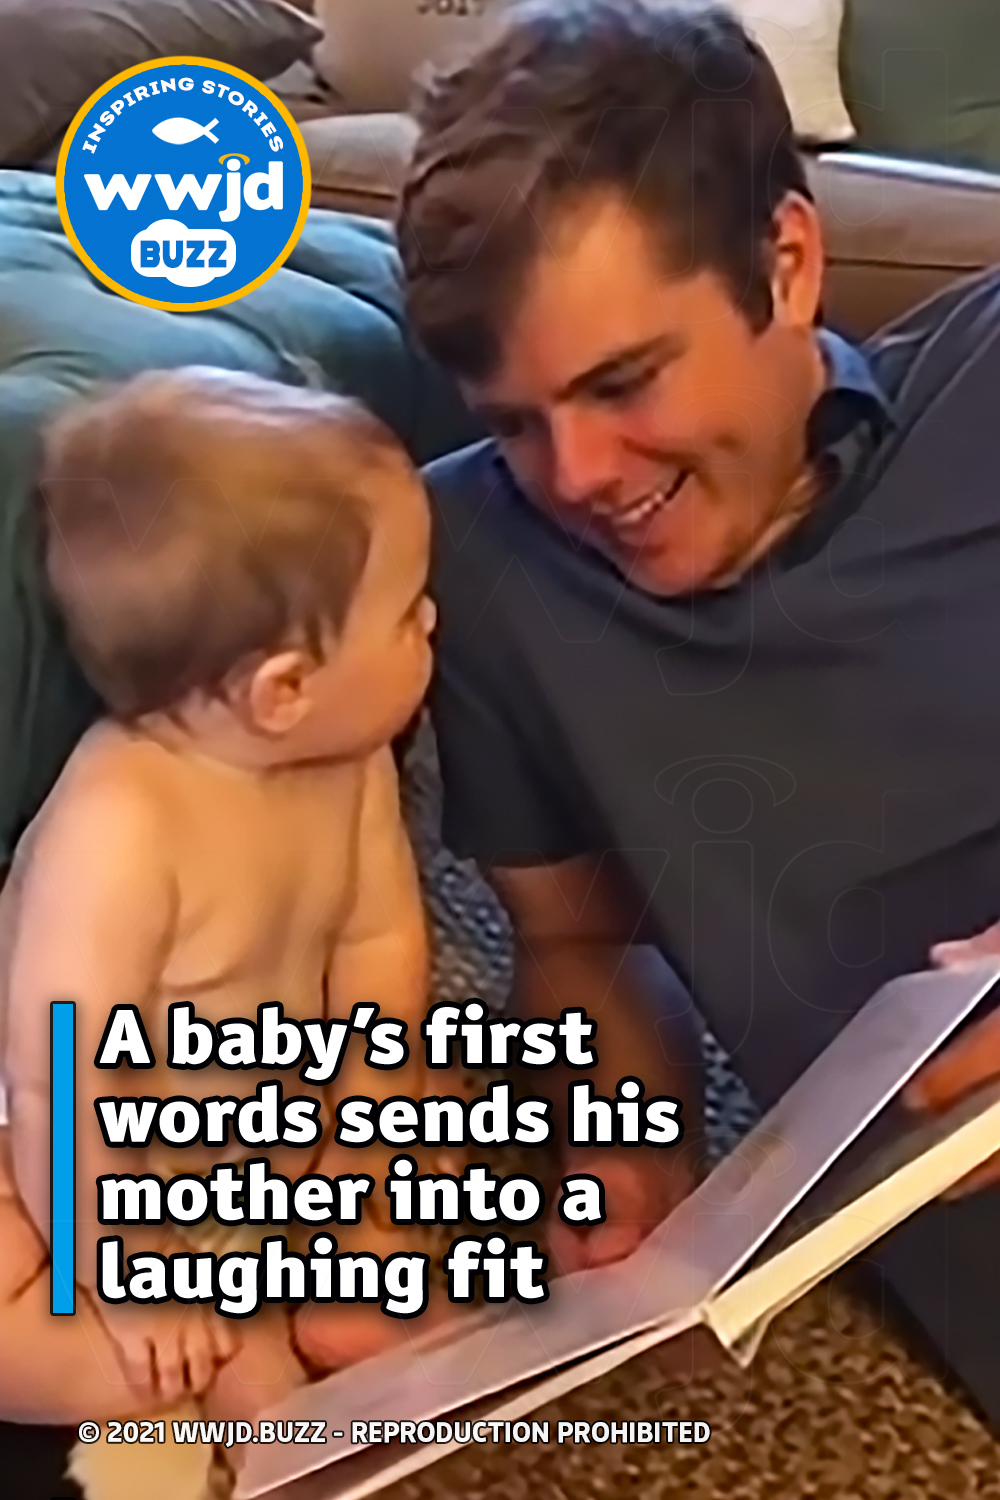 A baby’s first words sends his mother into a laughing fit